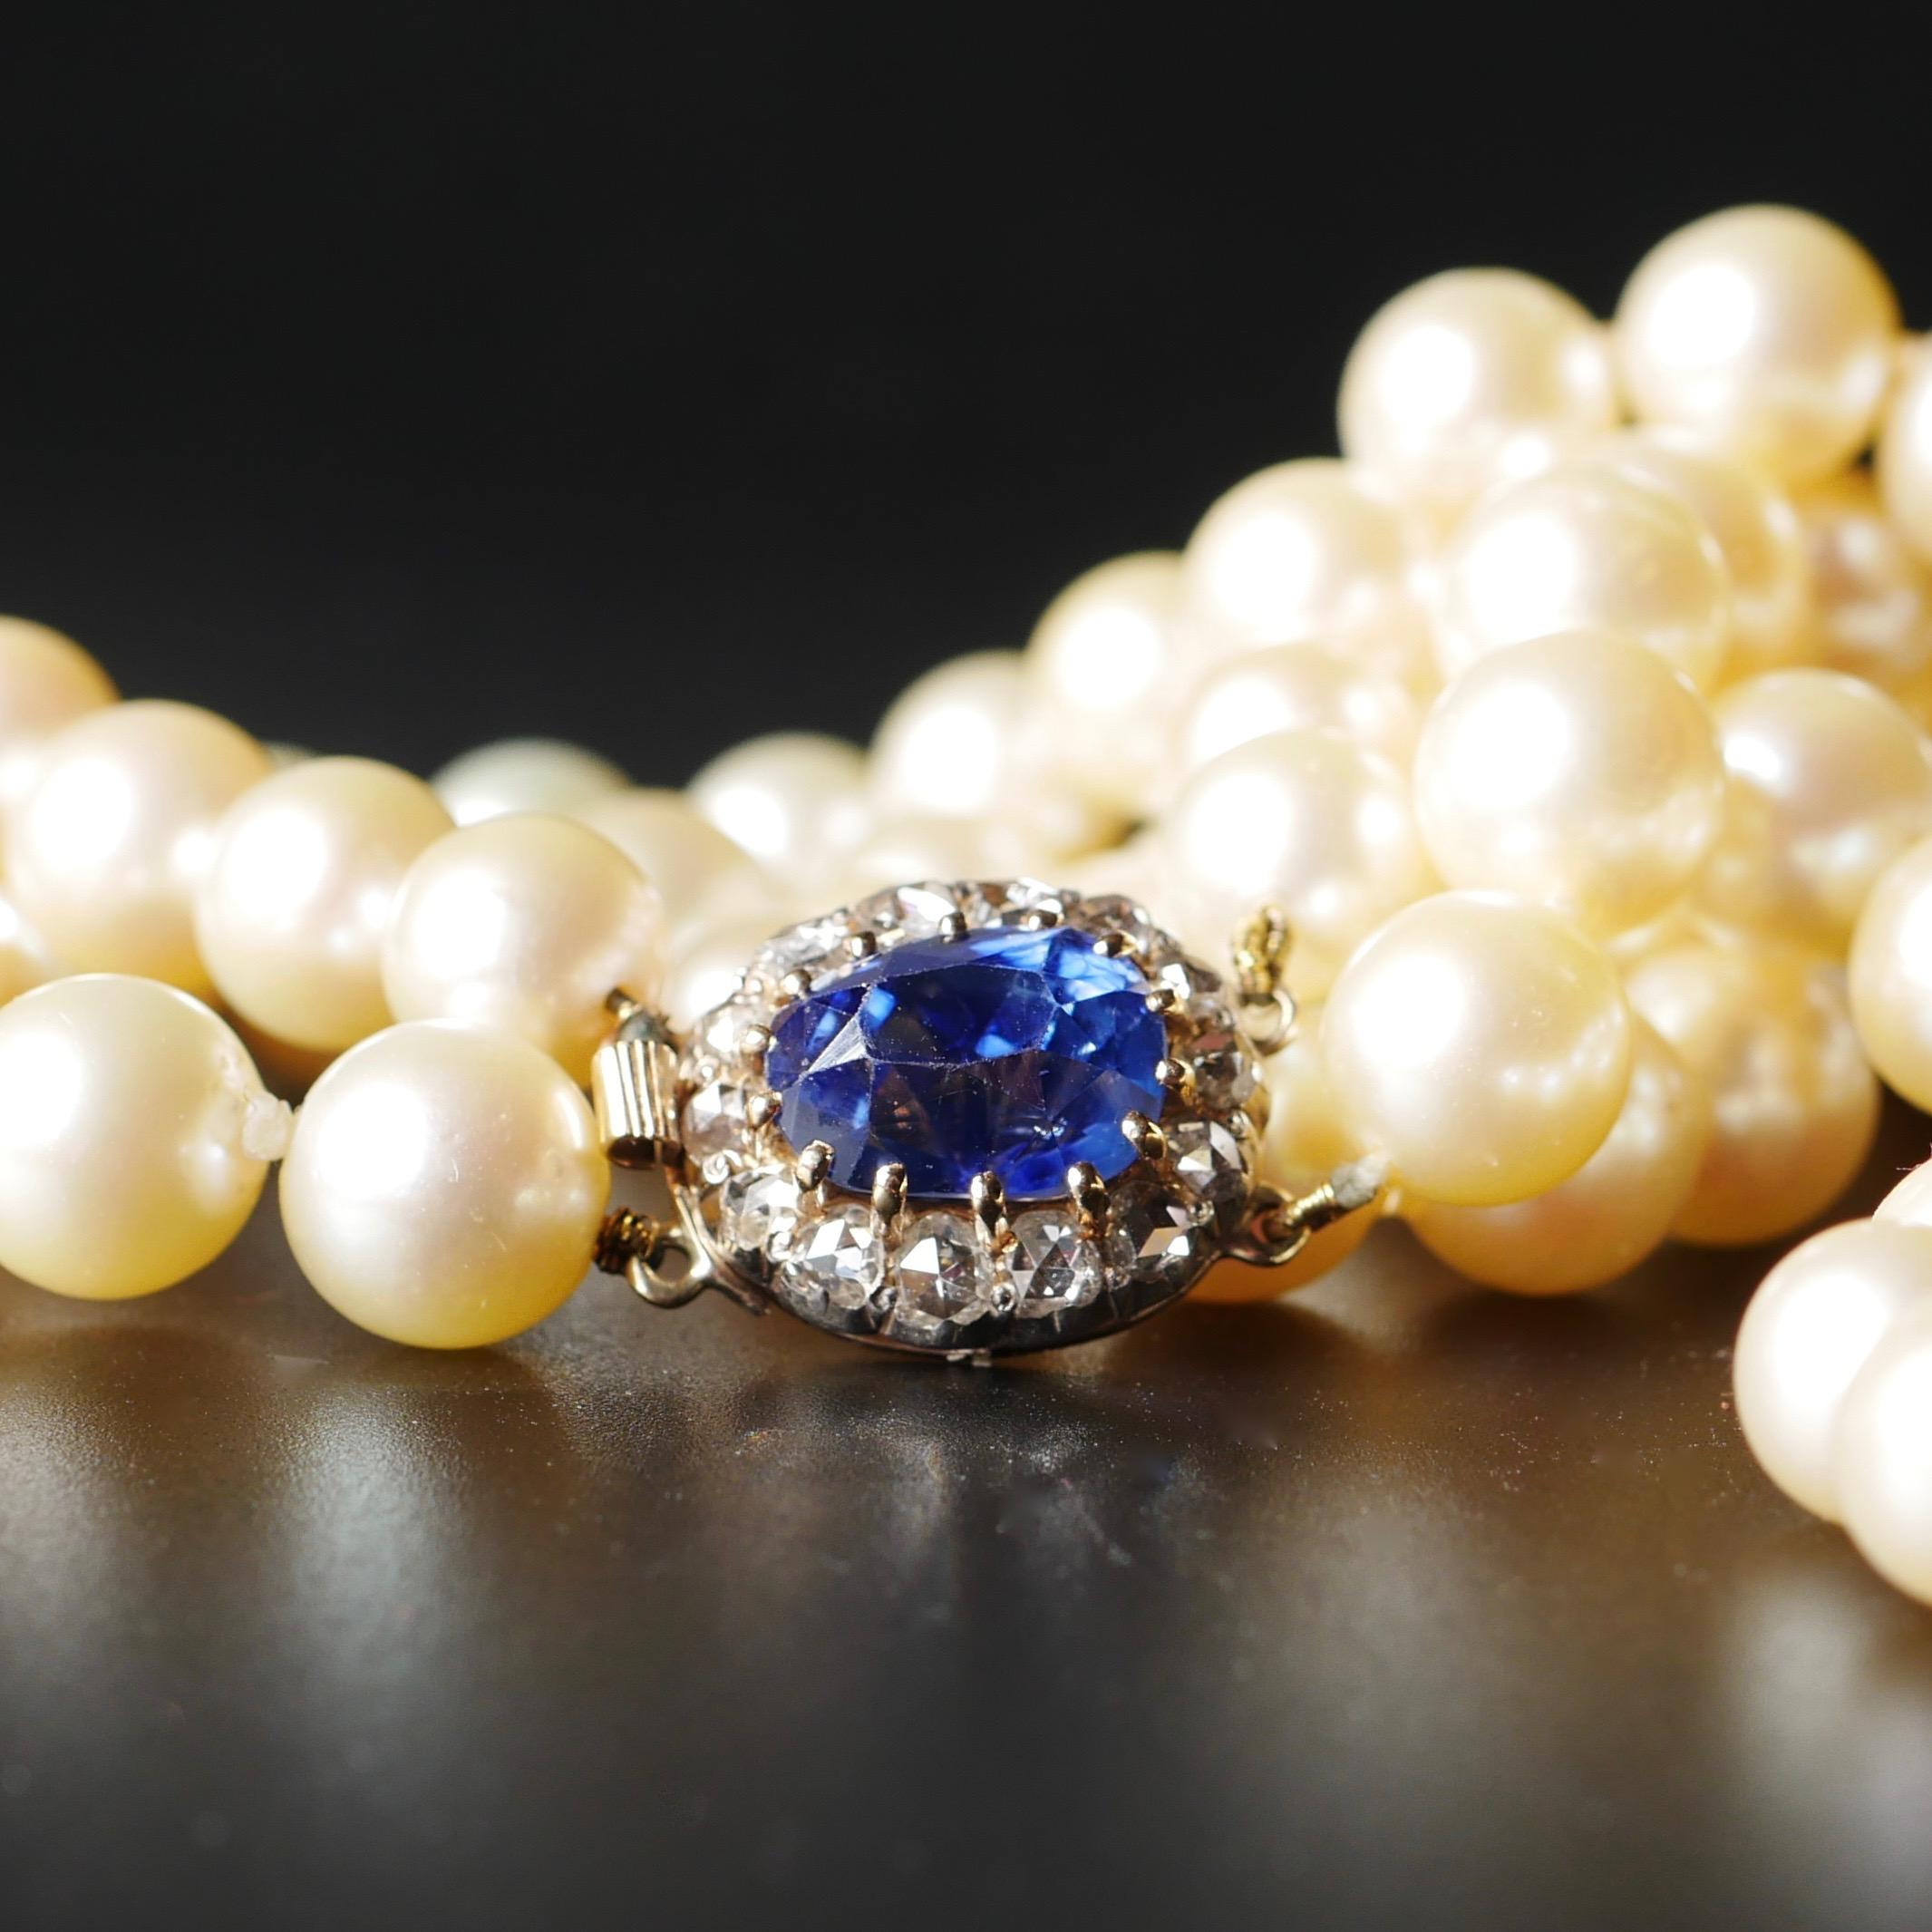 A two-row cultured pearl necklace 41 cms in length

Complete with a Diamond and Sapphire clasp

The diamonds are old rose cut diamonds and an estimated 1.70cts 
The mid deep blue Ceylon sapphire is 4.20cts and certificated with no indication of any